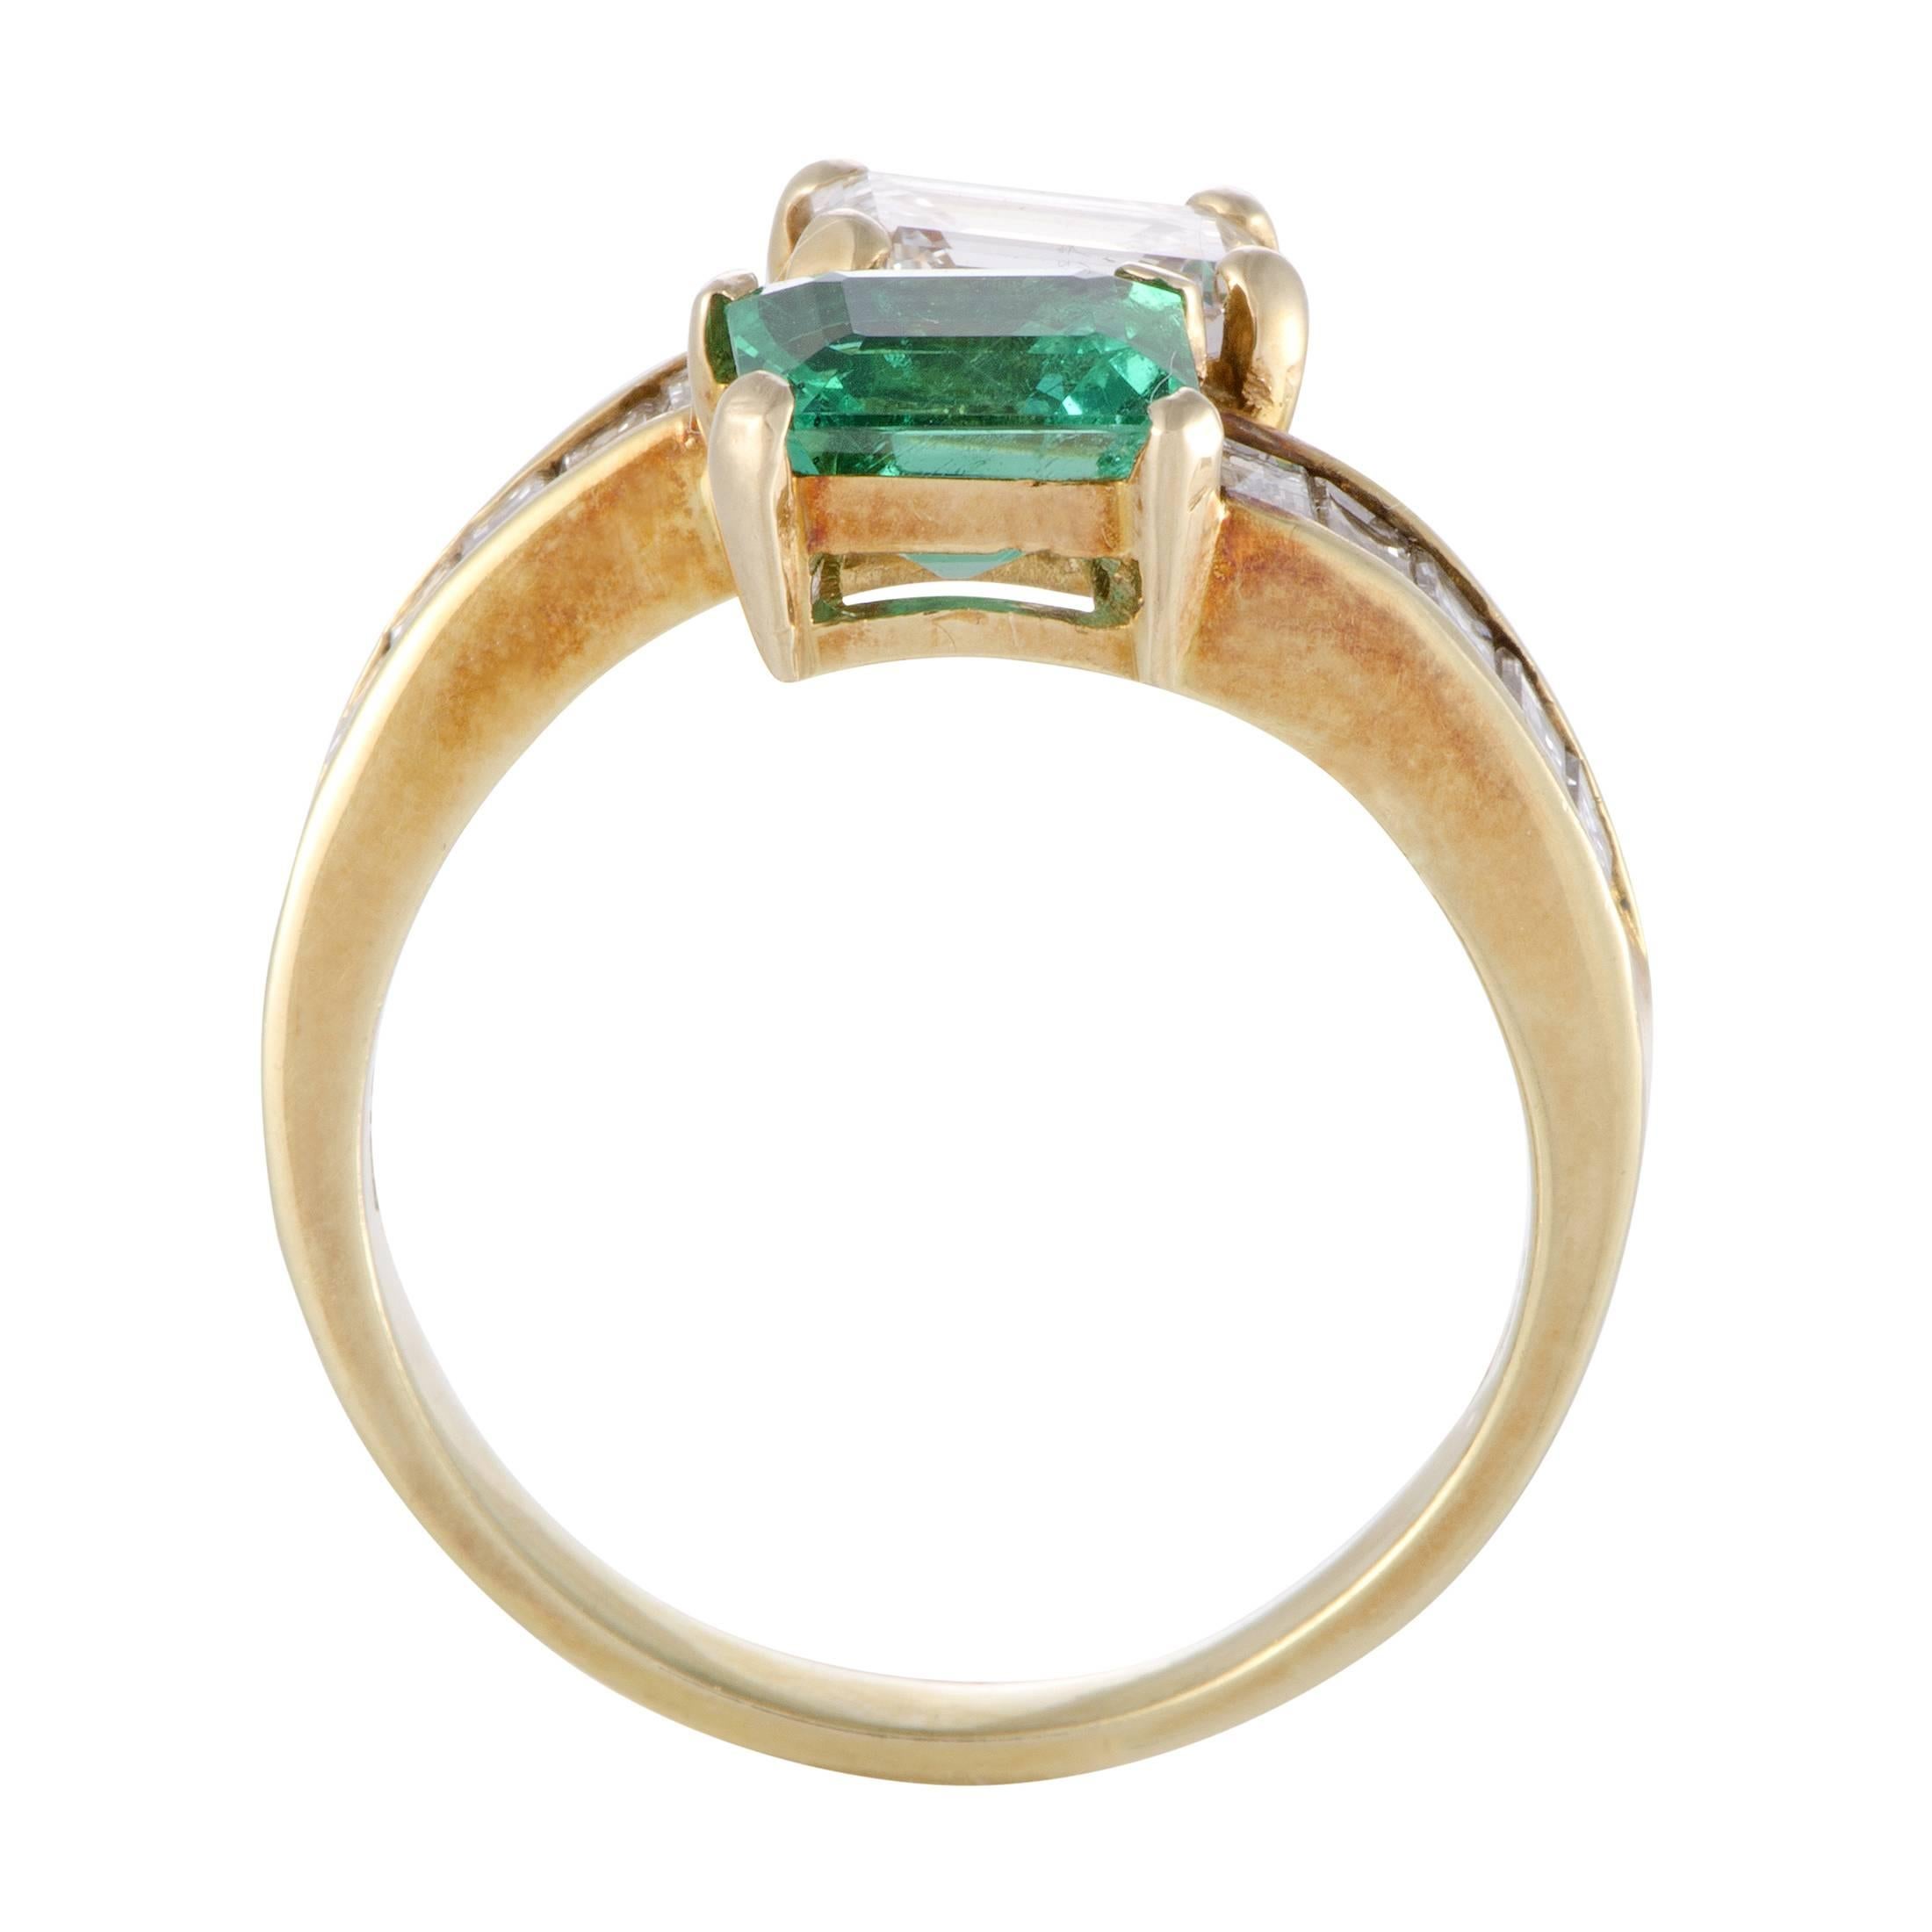 Compelling with their exquisite cut, the vivid emeralds weighing 1.20 carats and majestic central diamond weighing 1.02 carats are brilliantly complemented by the glistening side diamonds amounting to 1.12 carats in this magnificent 18K yellow gold